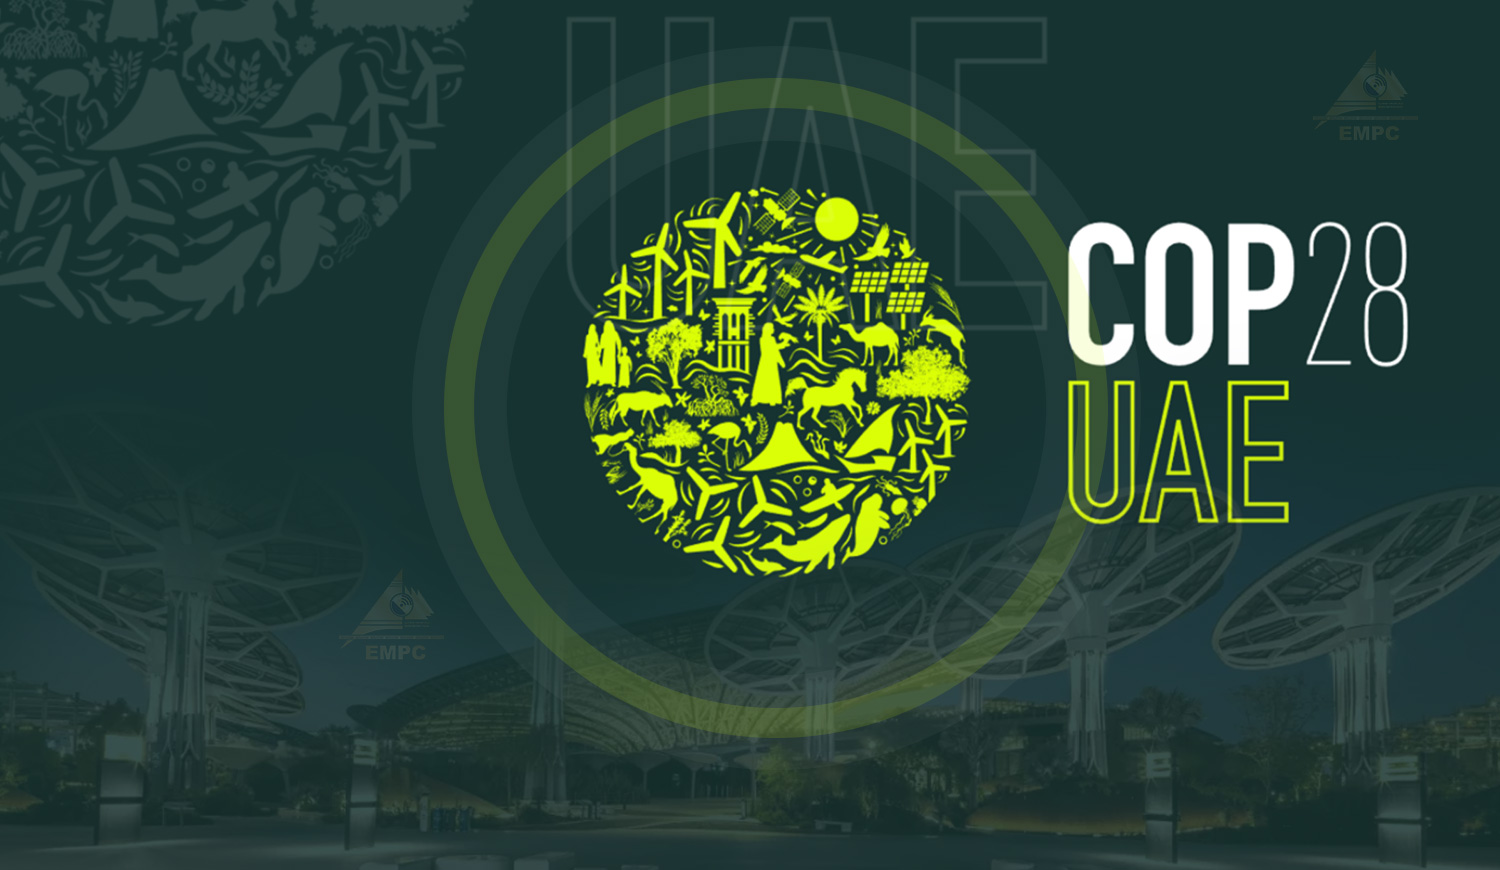 What is the conference that the UAE is hosting during COP28?